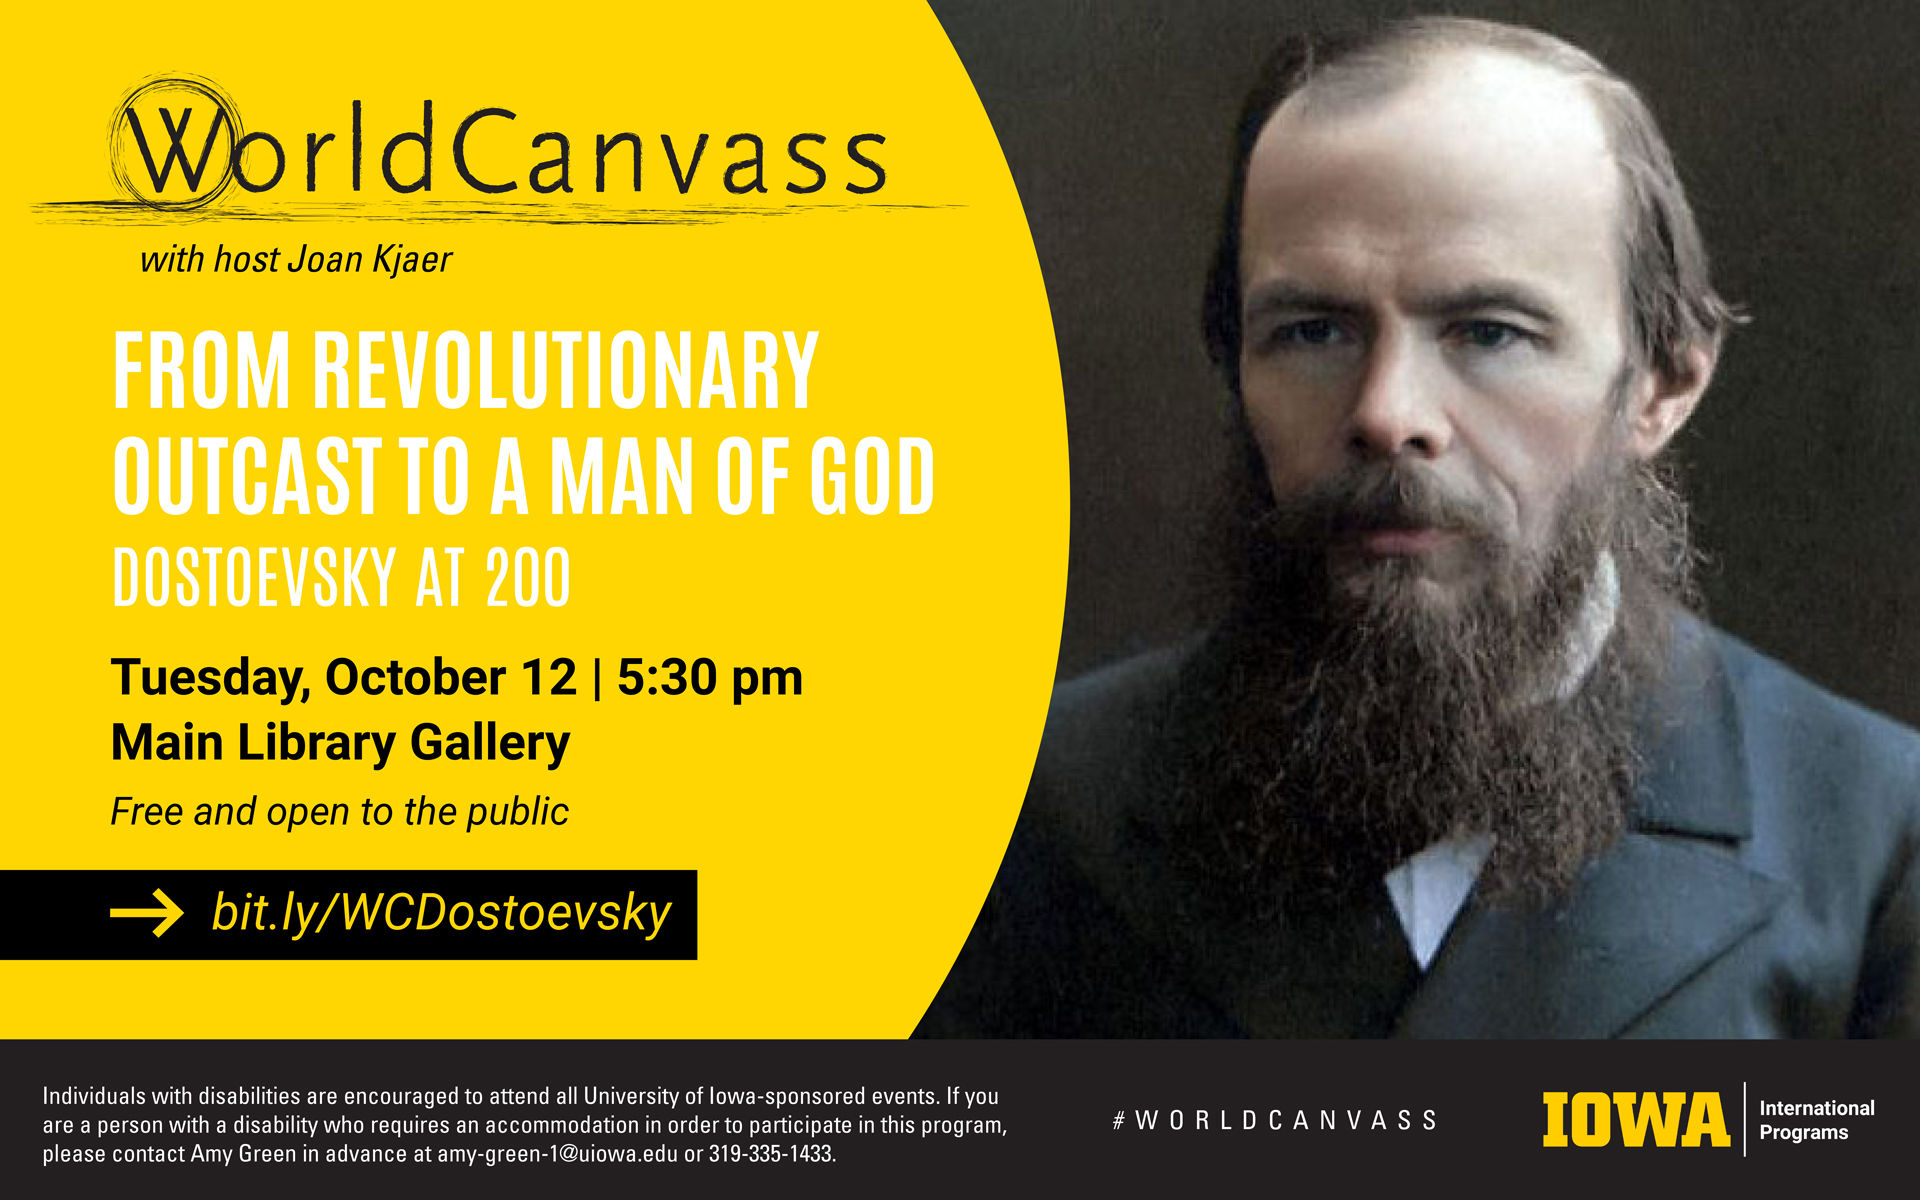 From revolutionary outcast to man of god Dostoevsky at 200. Tuesday October 12 at 5 30 pm Main Library Gallery Free and Open to the public. Visit bit.ly/WCDostoevsky for more.